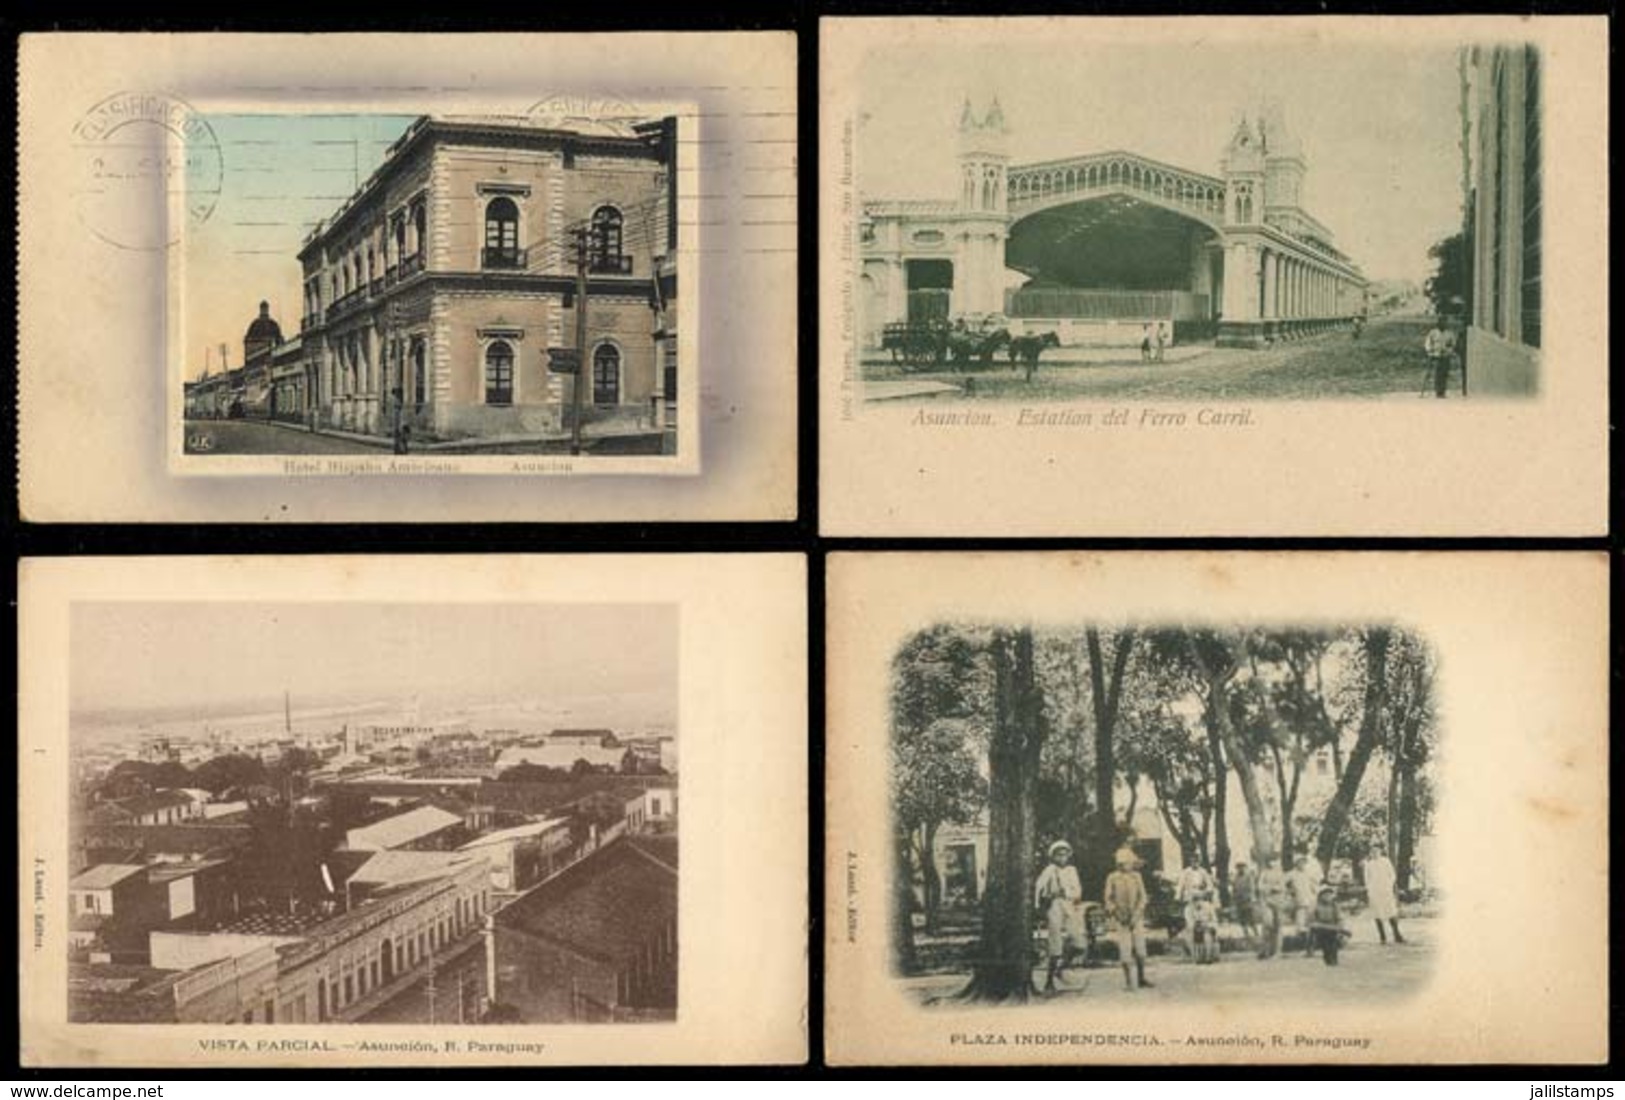 PARAGUAY: ASUNCIÓN: 8 Old And Very Handsome Postcards, Very Good Views, Excellent Quality, Rare Group! - Paraguay